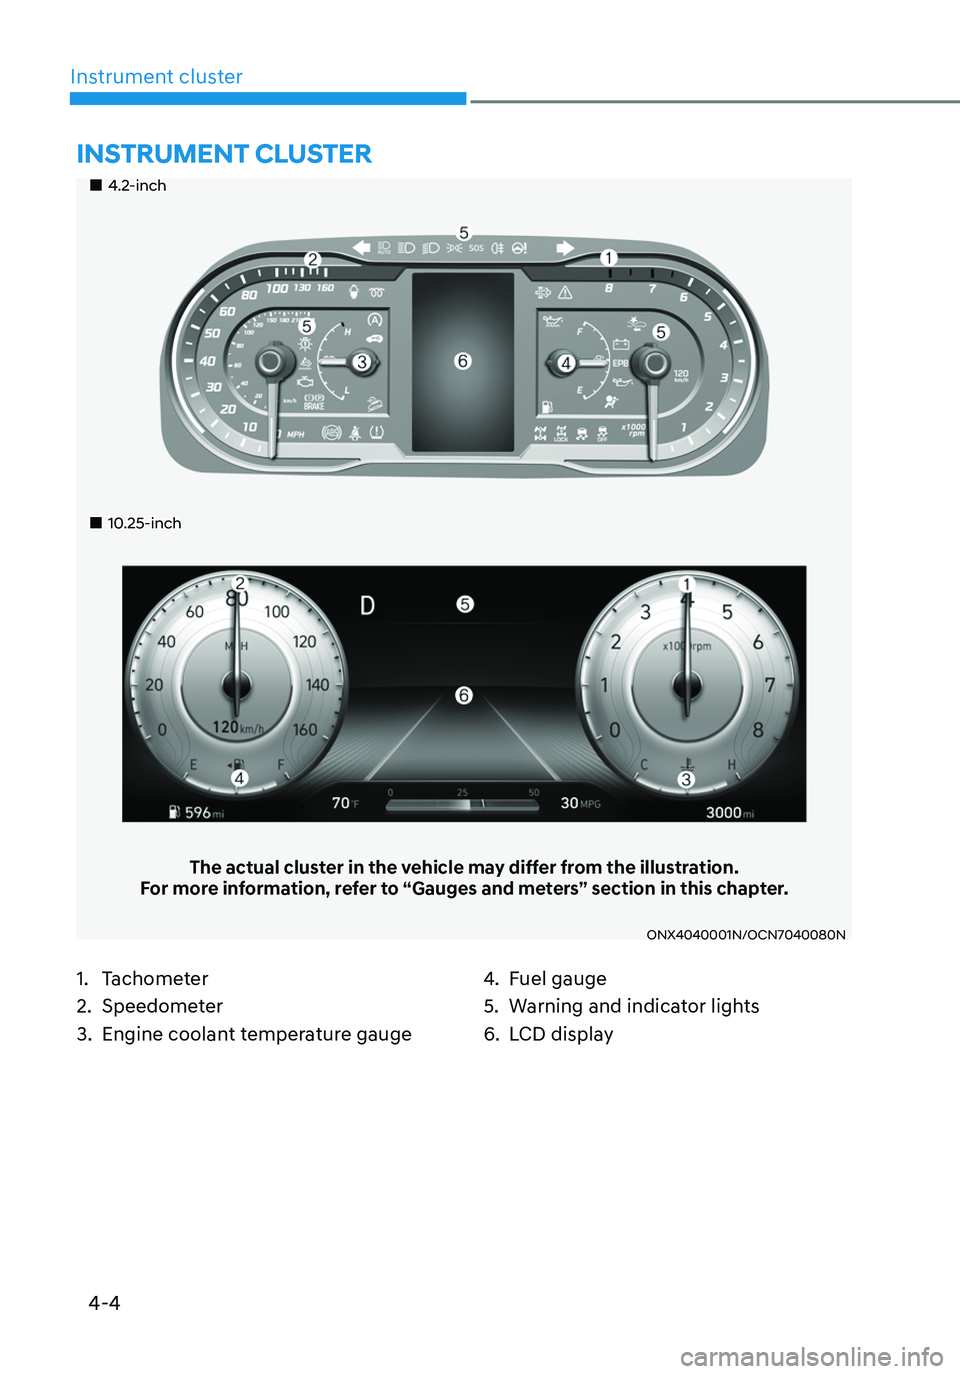 HYUNDAI TUCSON 2022 User Guide 4-4
Instrument cluster
„„4.2-inch
„„10.25-inch
The actual cluster in the vehicle may differ from the illustration.For more information, refer to “Gauges and meters” section in 